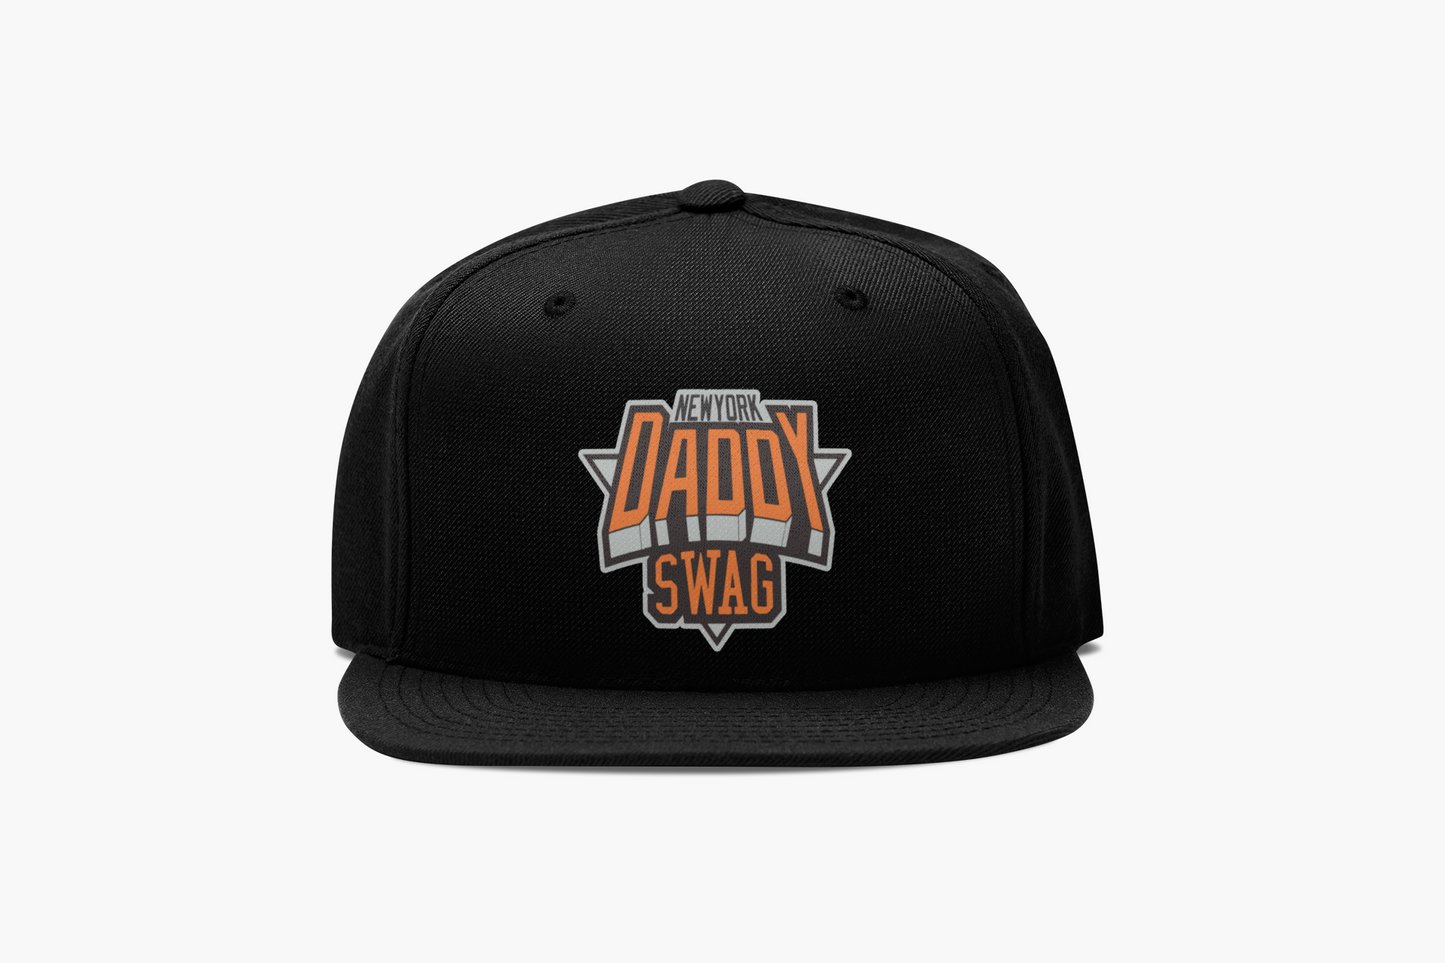 Daddy Swag New York Edition Snap-Back Hat